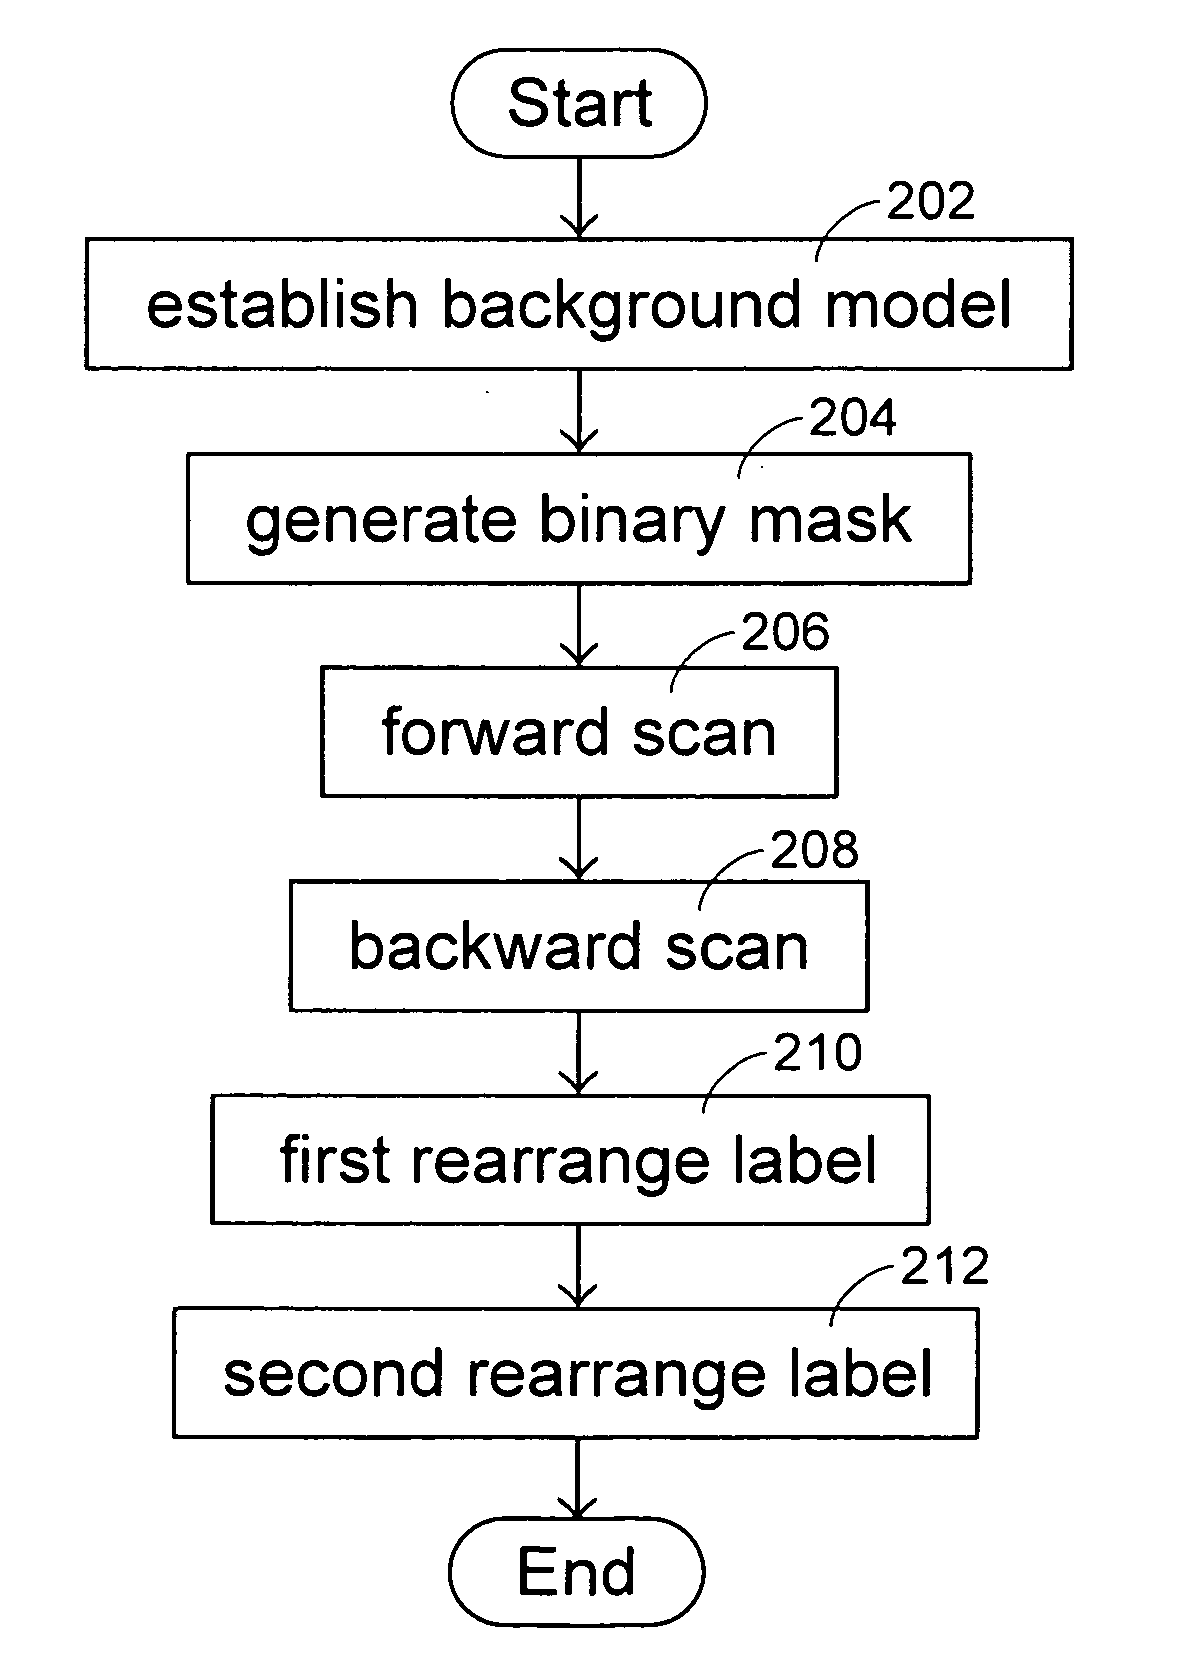 Image analysis using a hybrid connected component labeling process